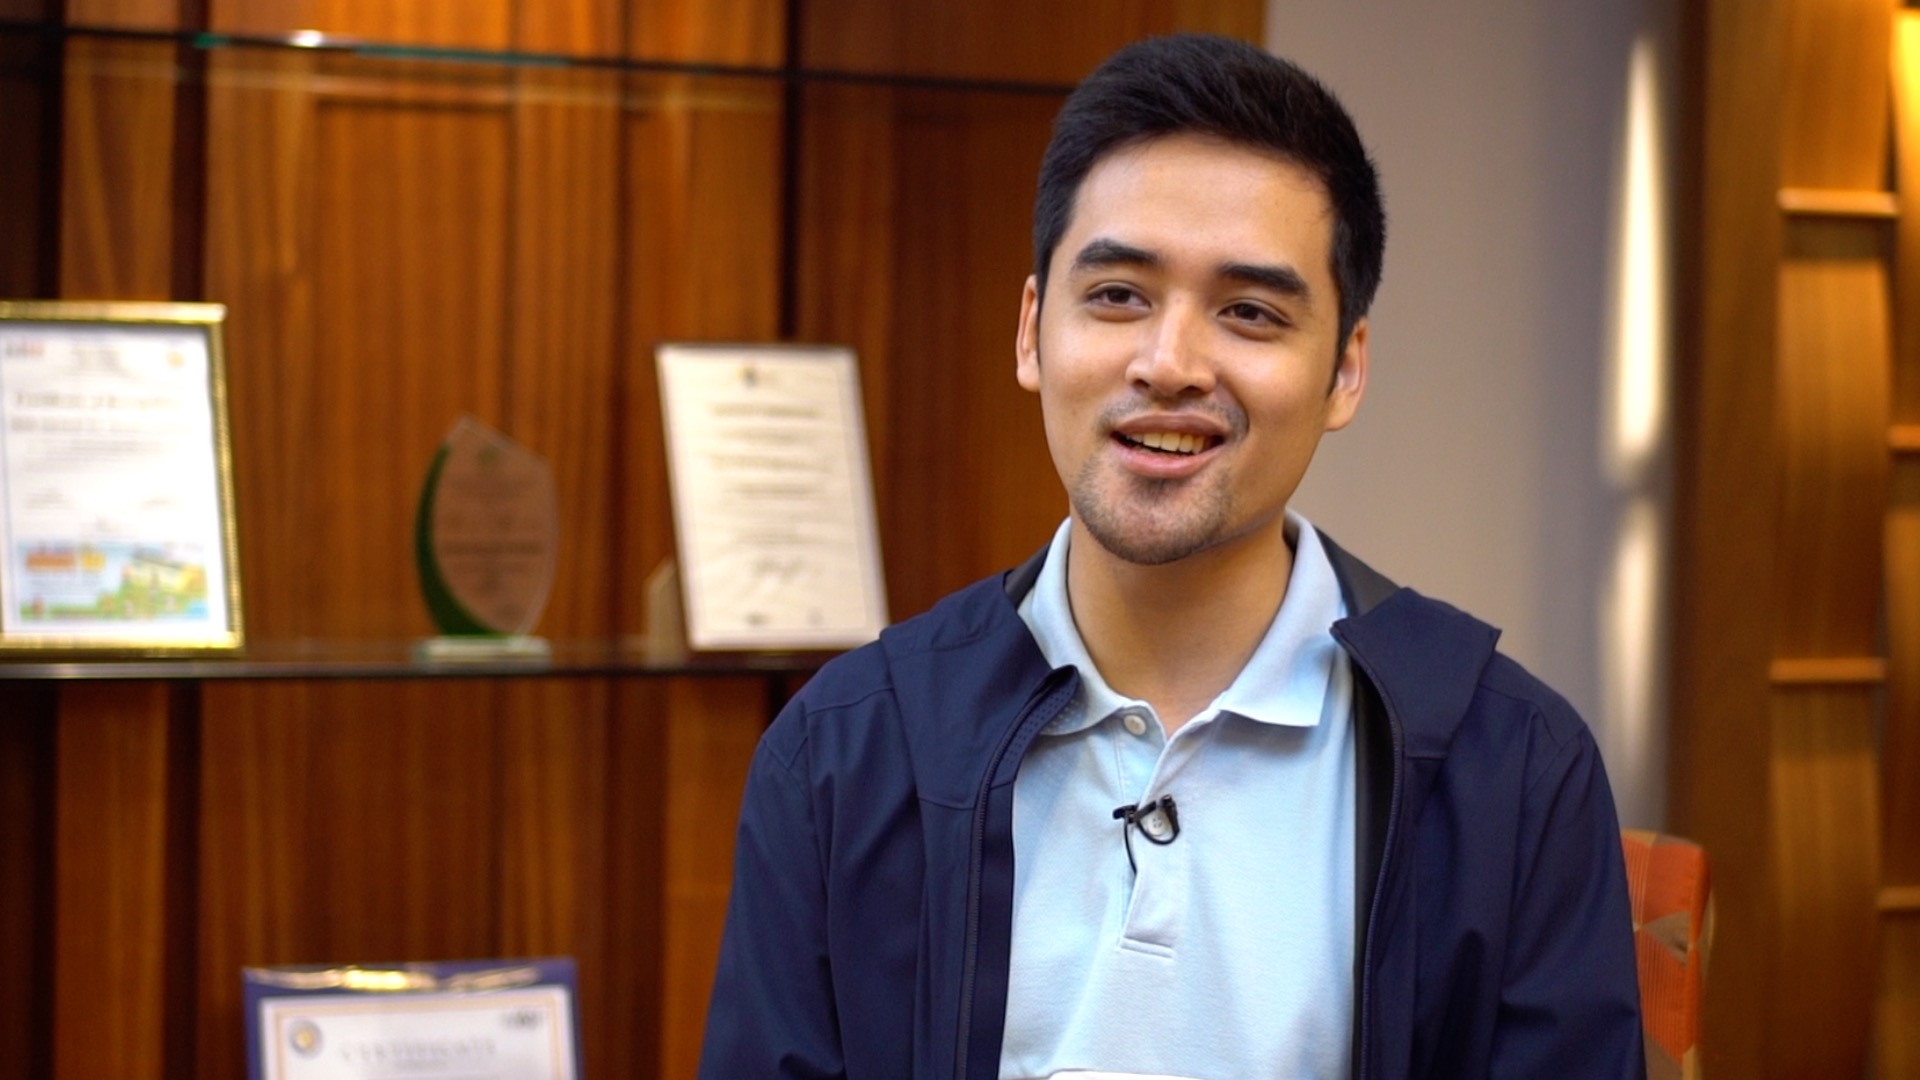 VICO SOTTO. Pasig Mayor Vico Sotto during an interview with Rappler in October 2019. Rappler screenshot 